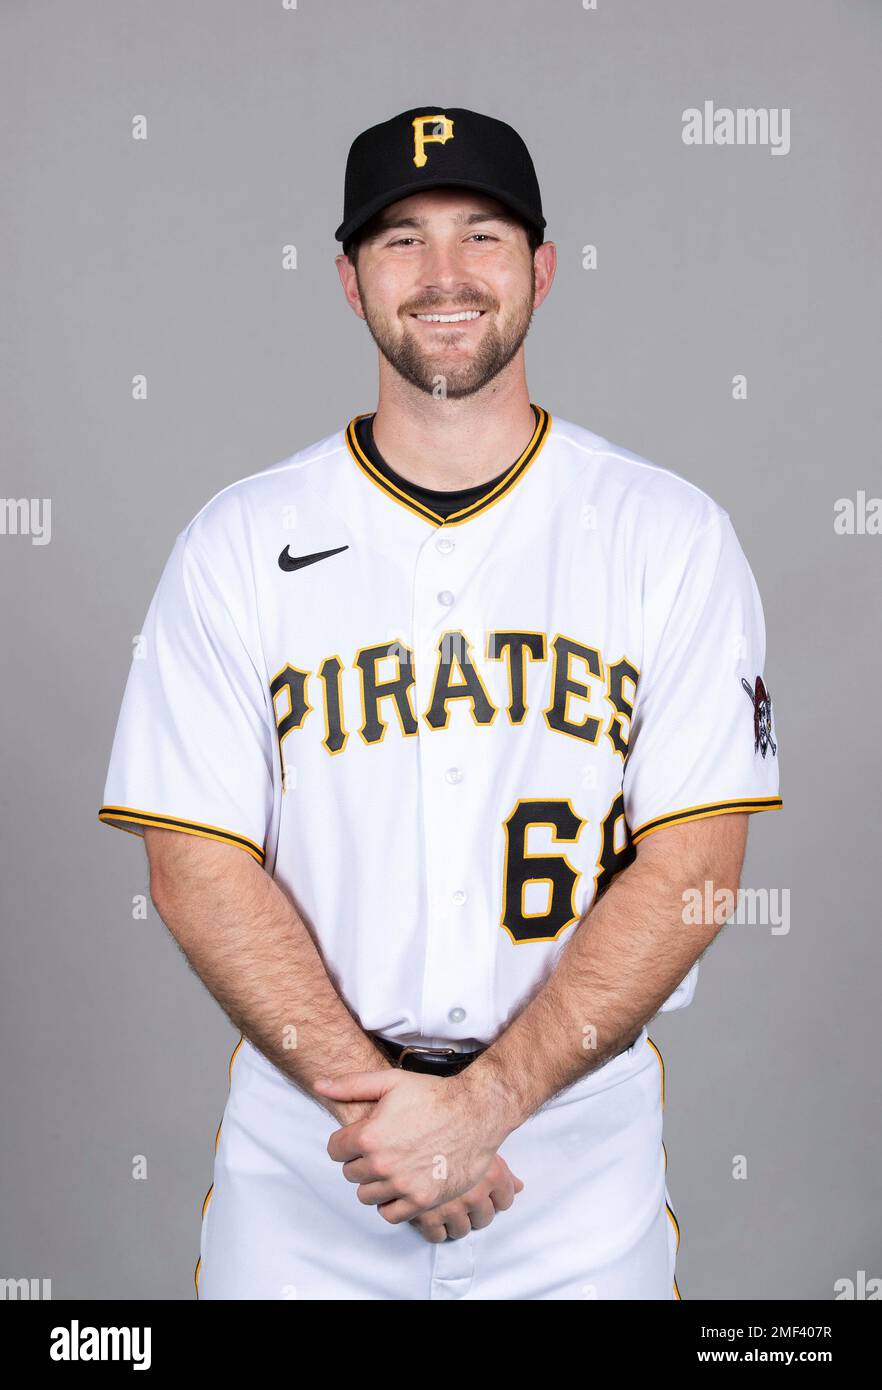 This is a 2021 photo of Jason Delay of the Pittsburgh Pirates